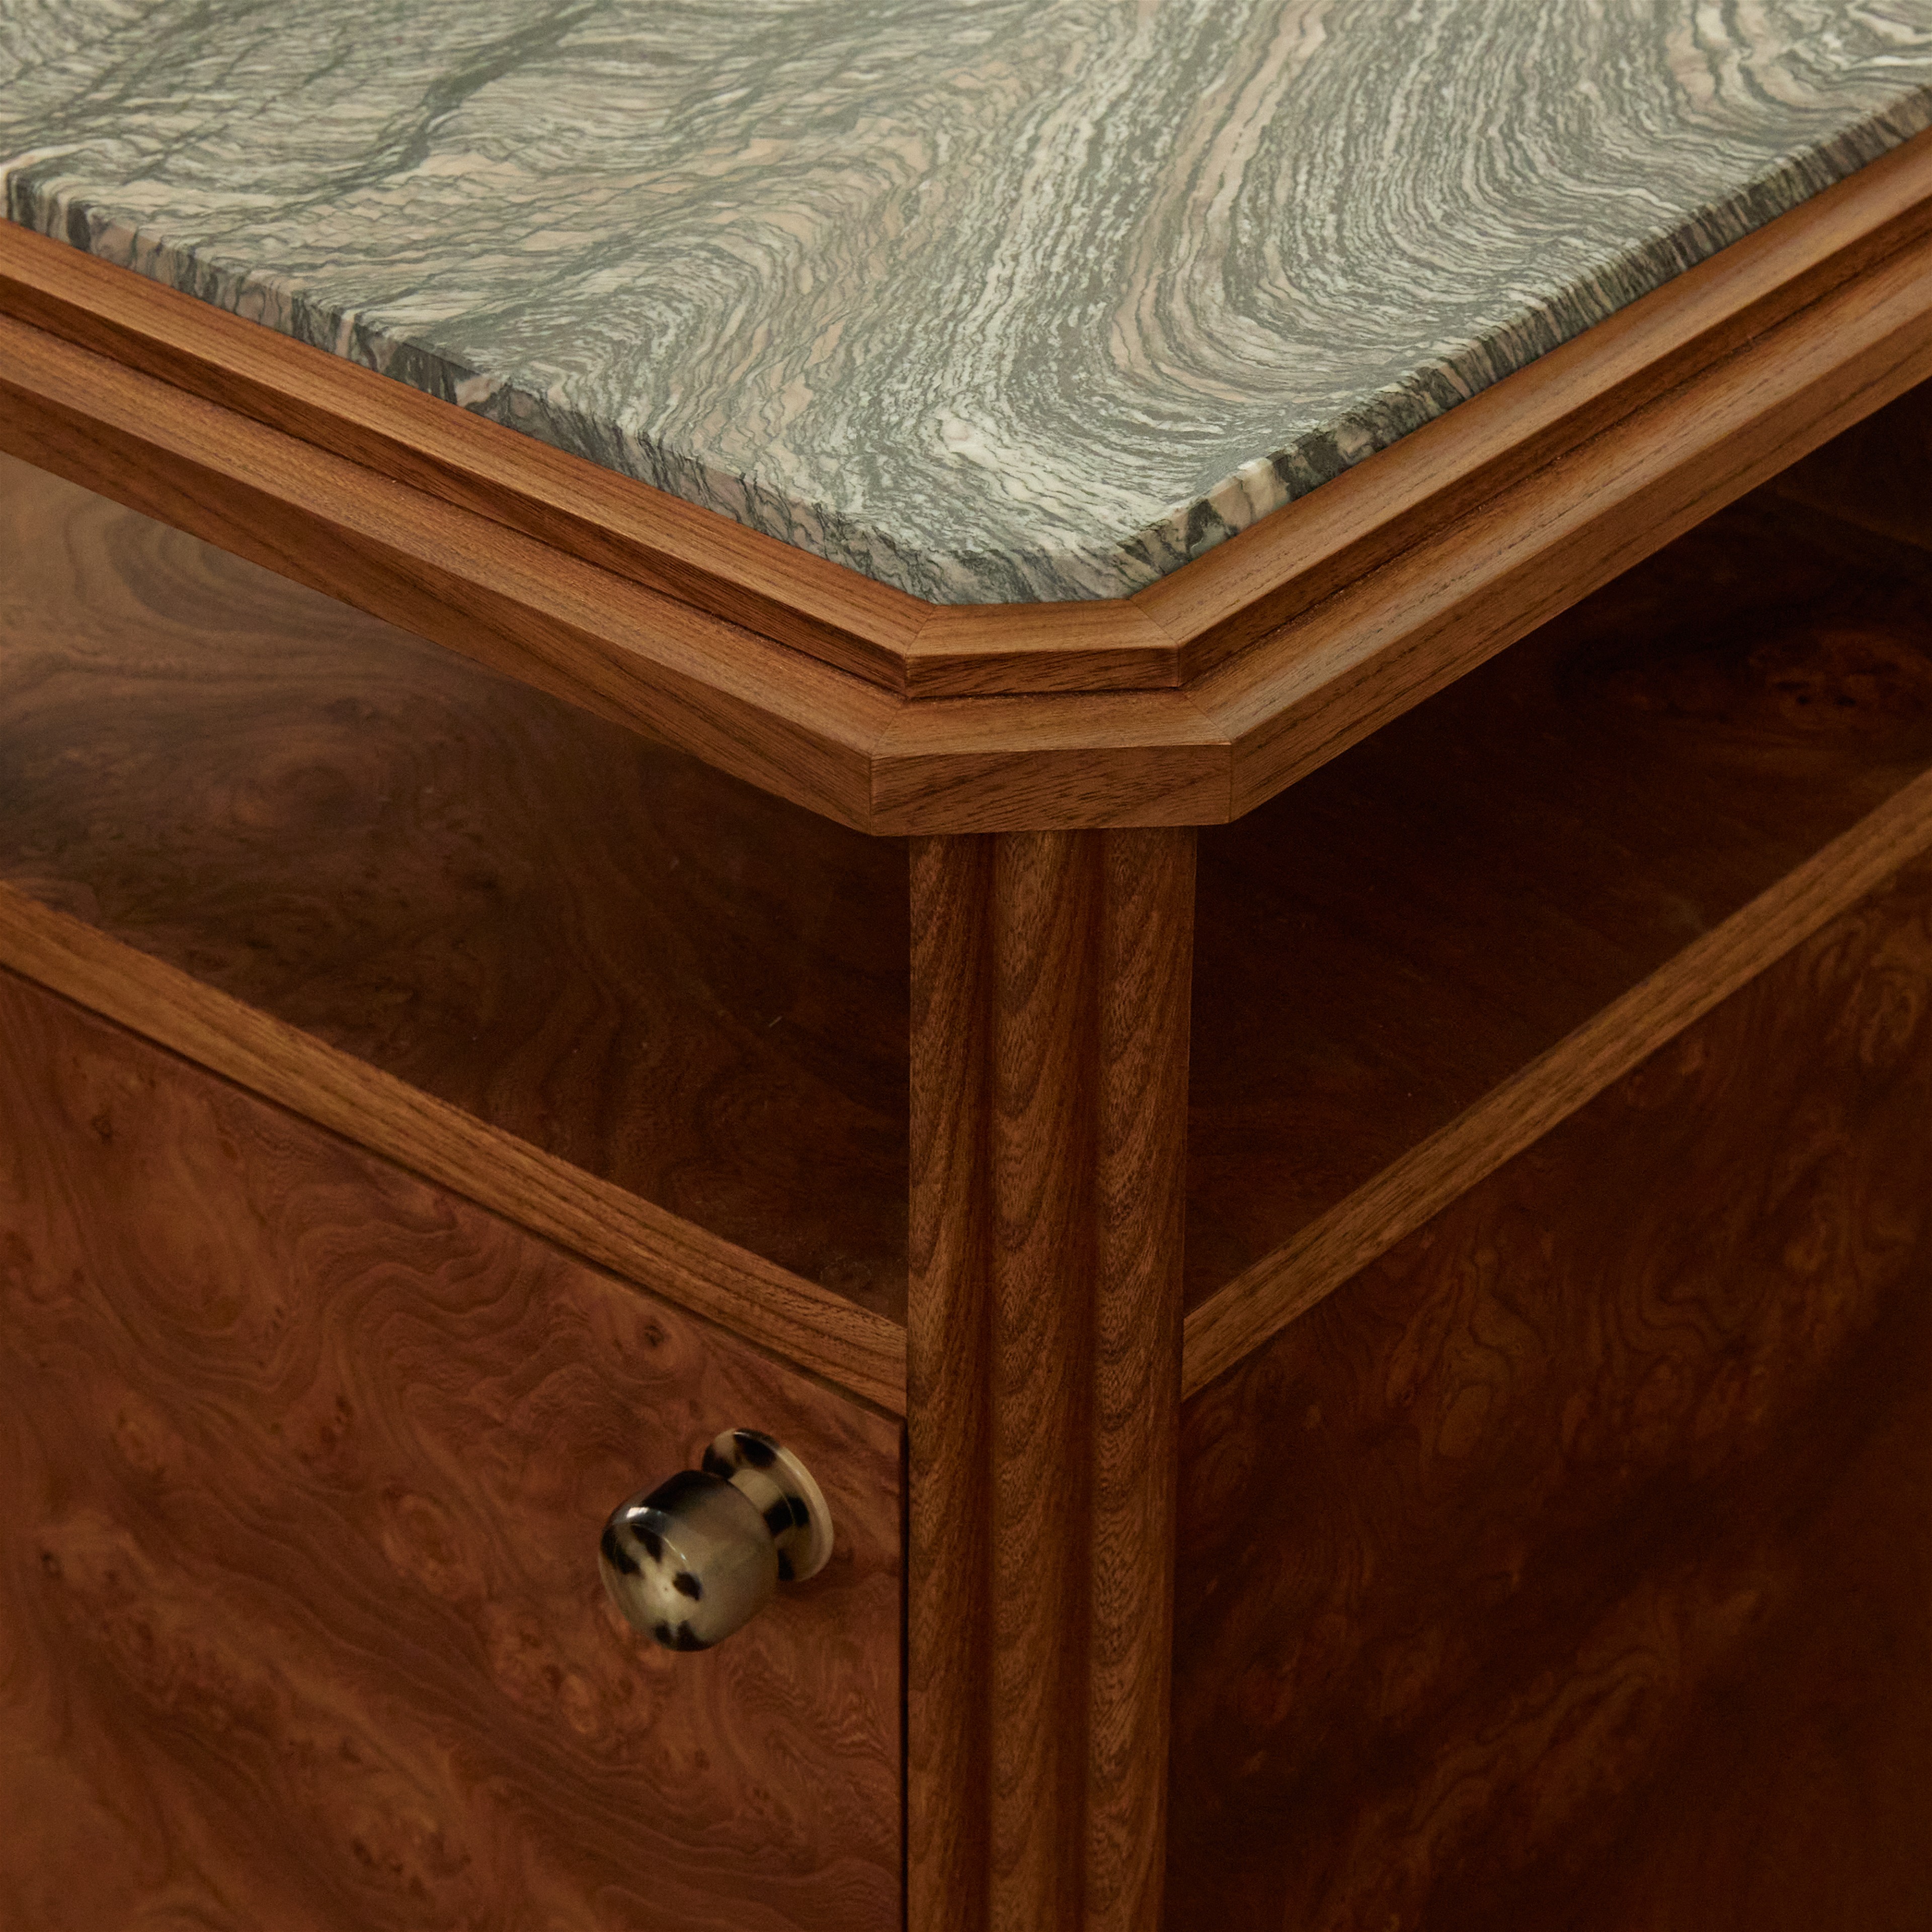 a close up of a wooden table with a marble top